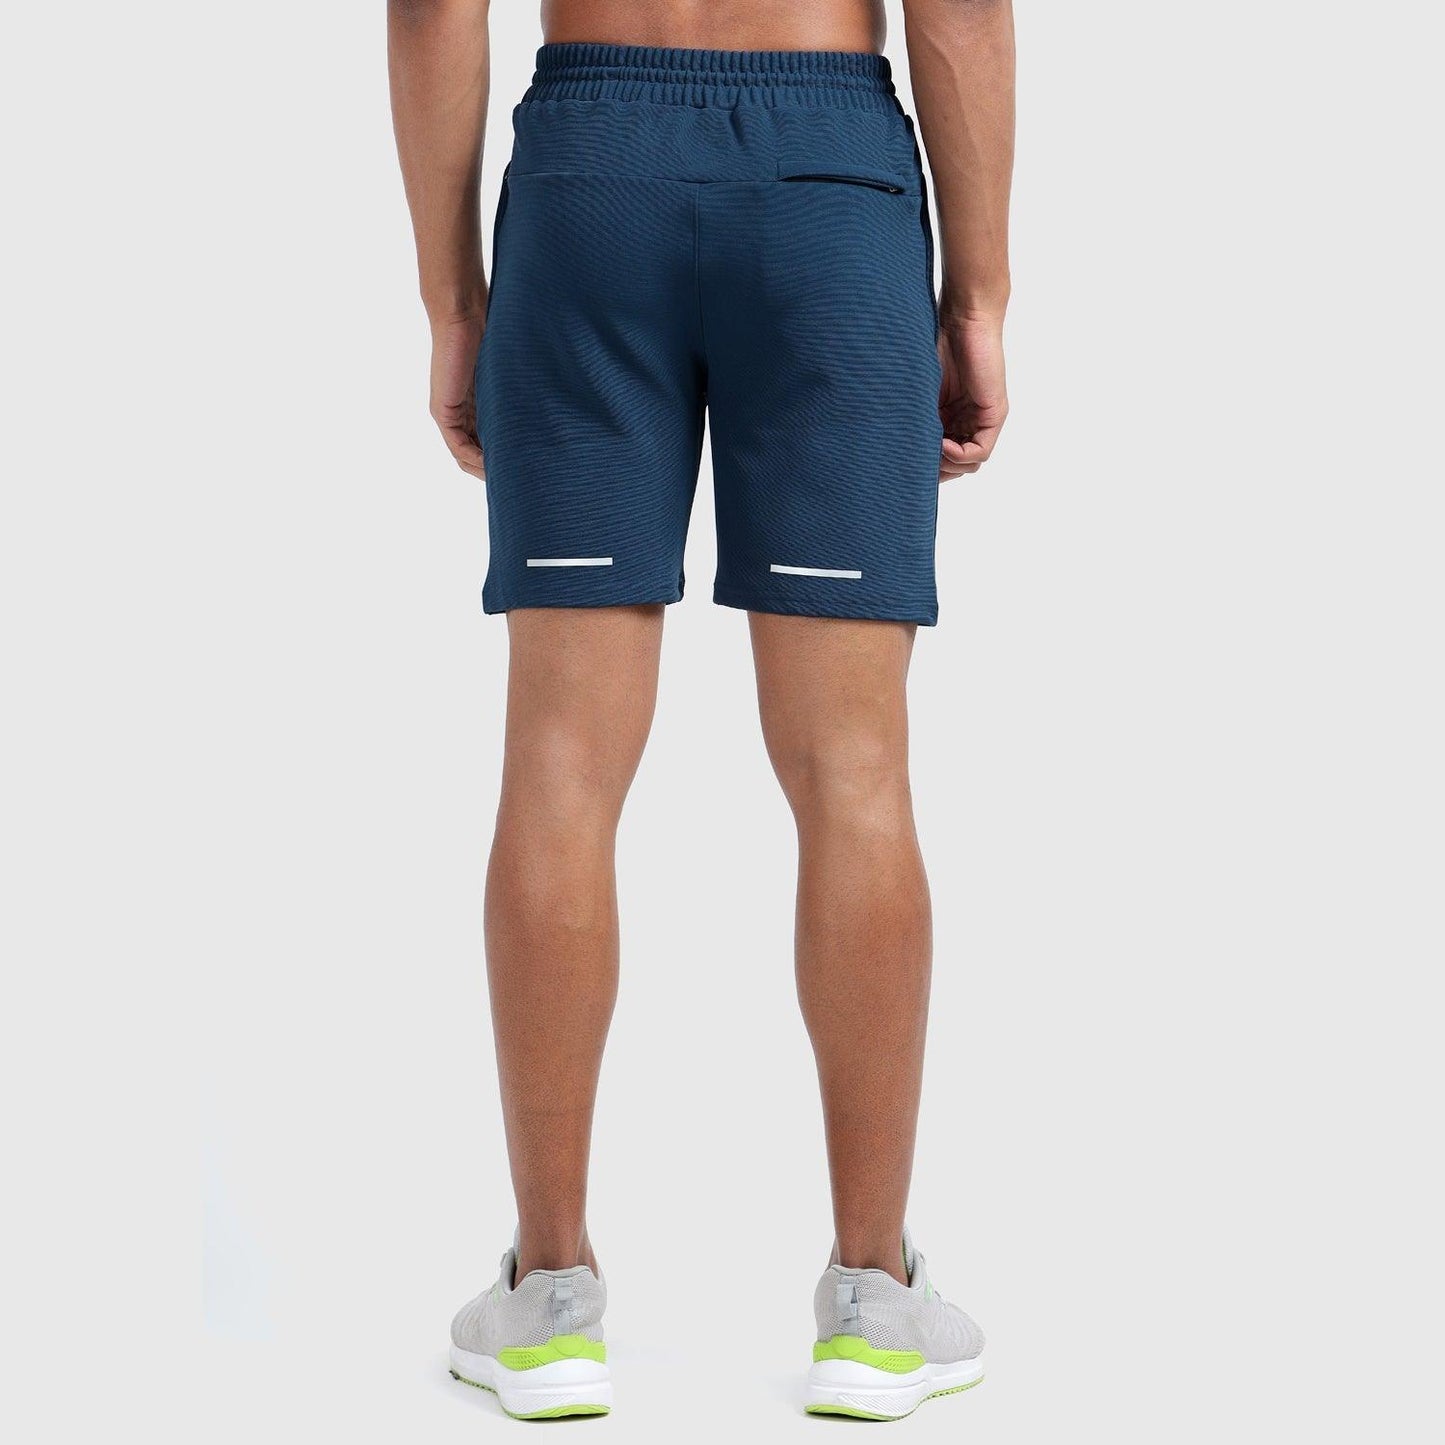 Denmonk's fashionable Trekready regal blue shorts for men will boost your level of gym fitness.